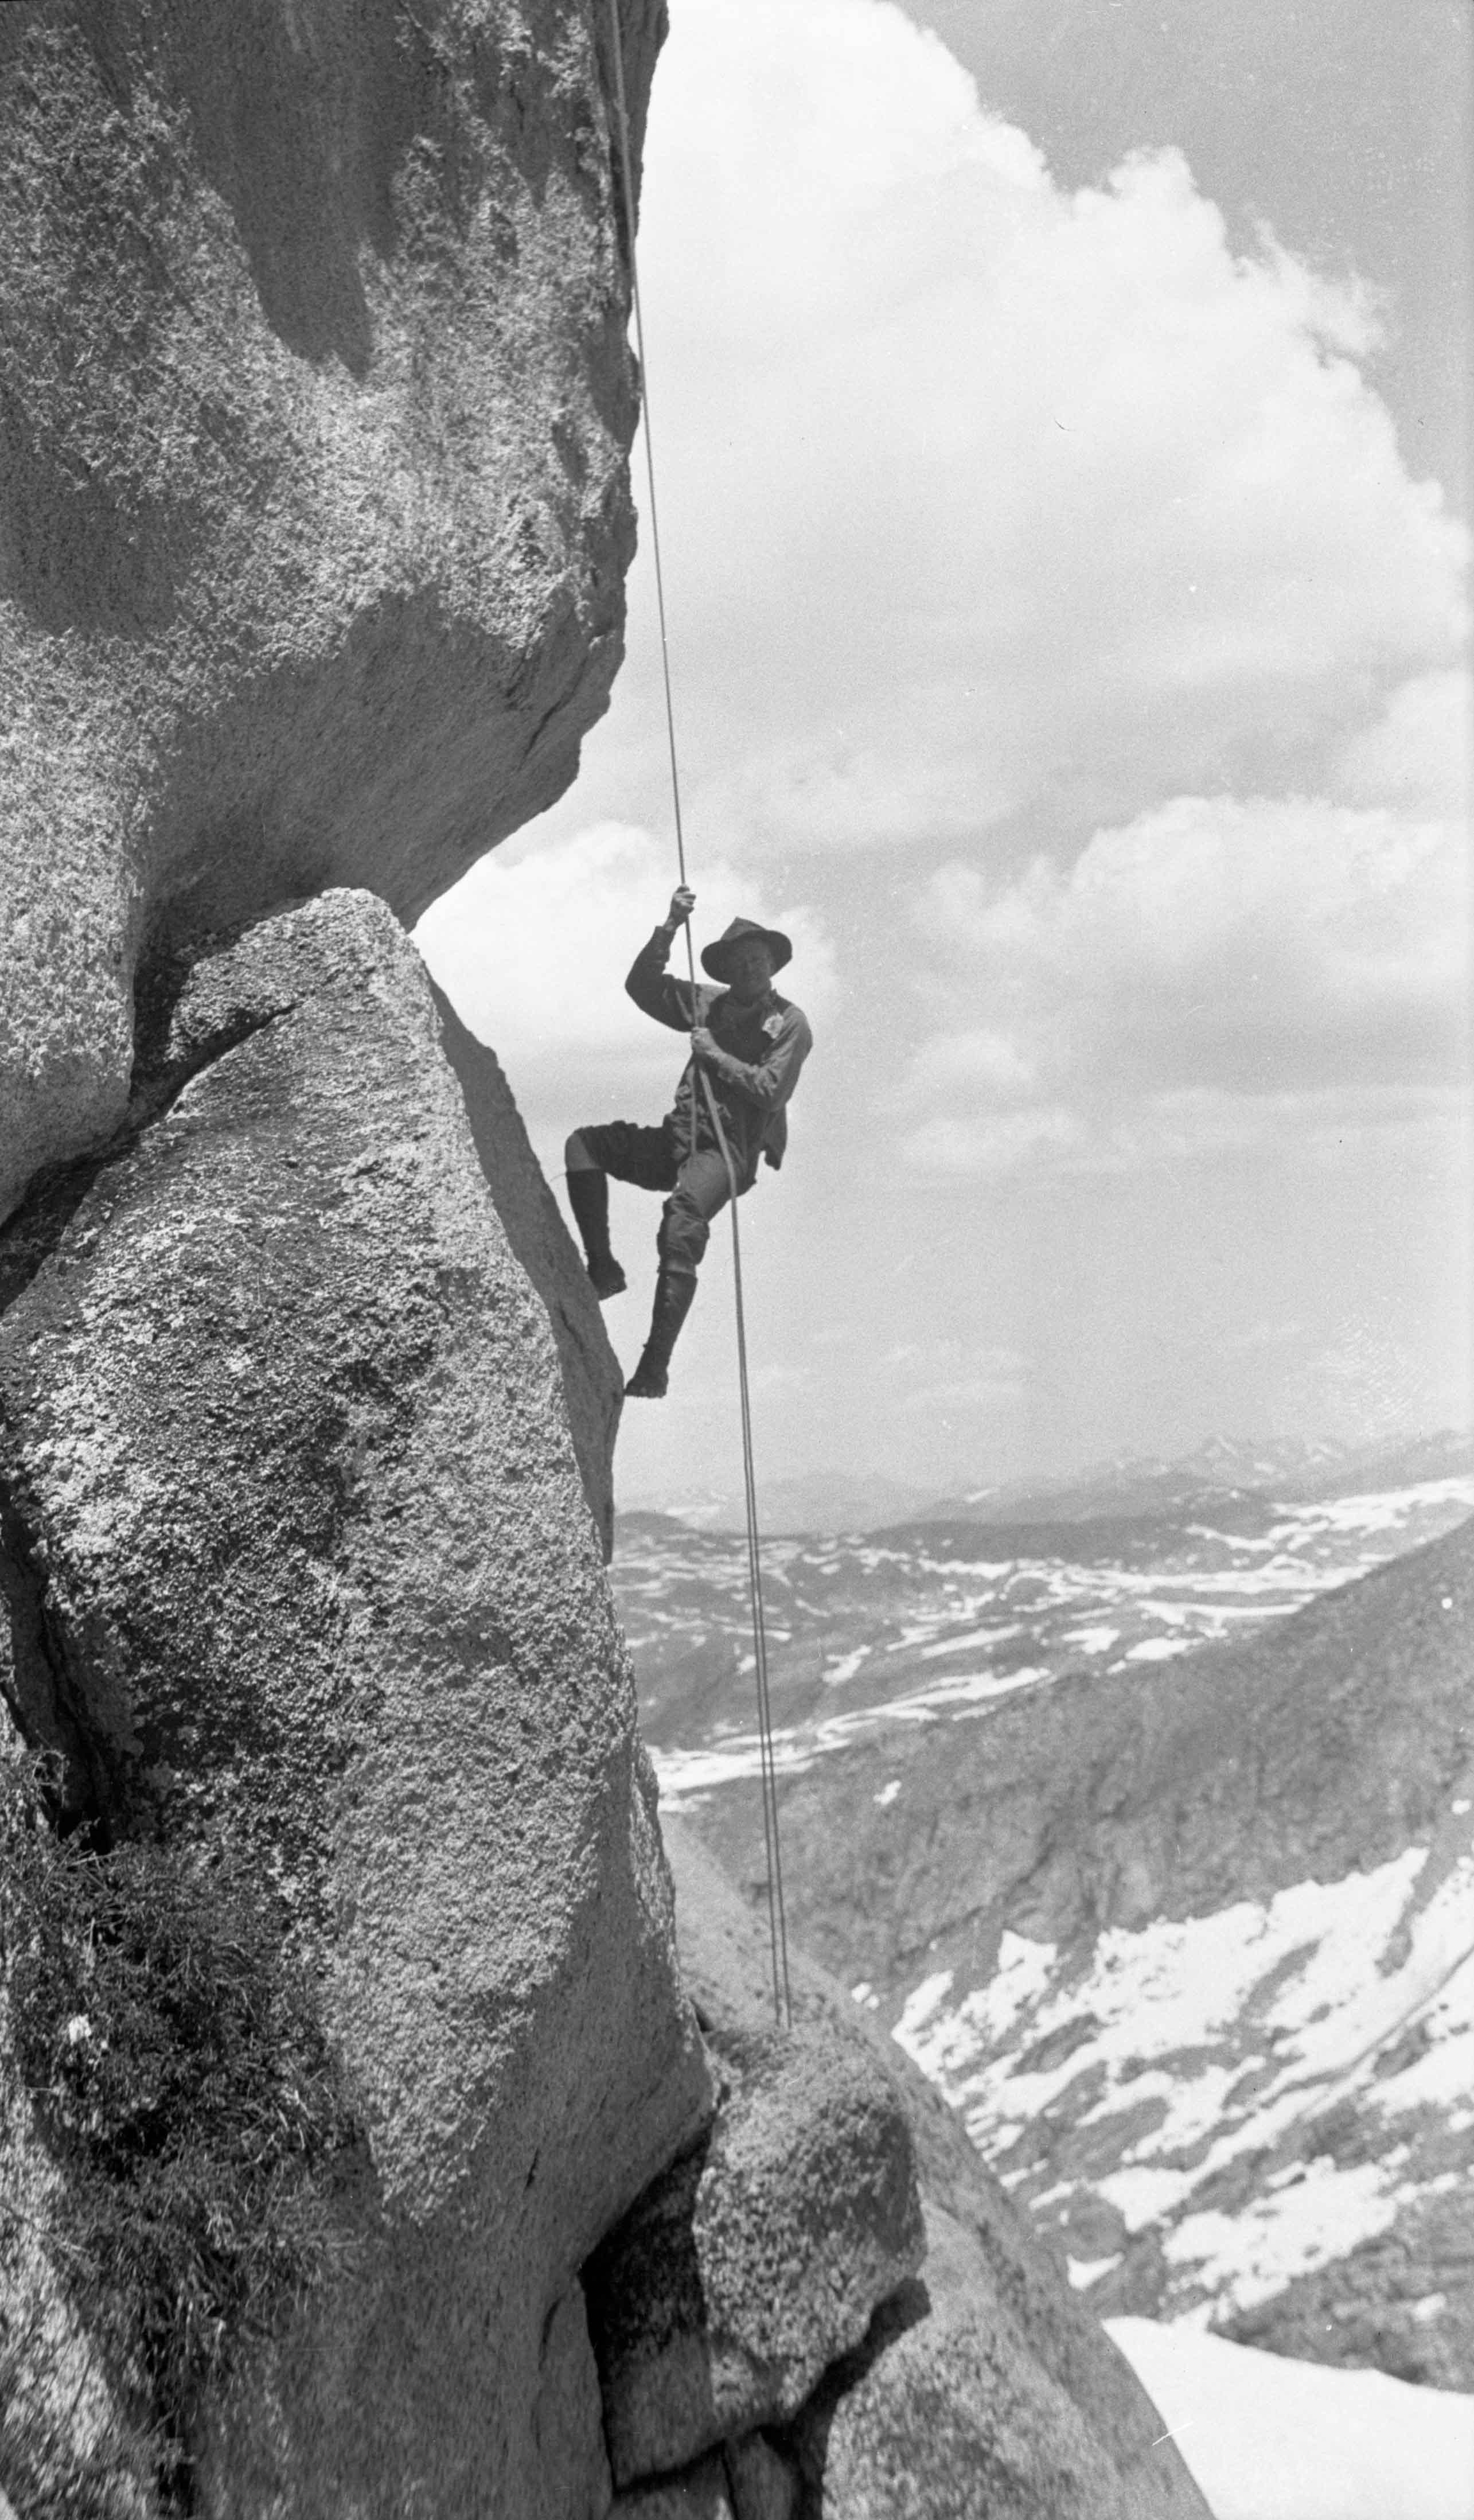 Norman Clyde, a Climbing Legend - Sequoia & Kings Canyon National Parks